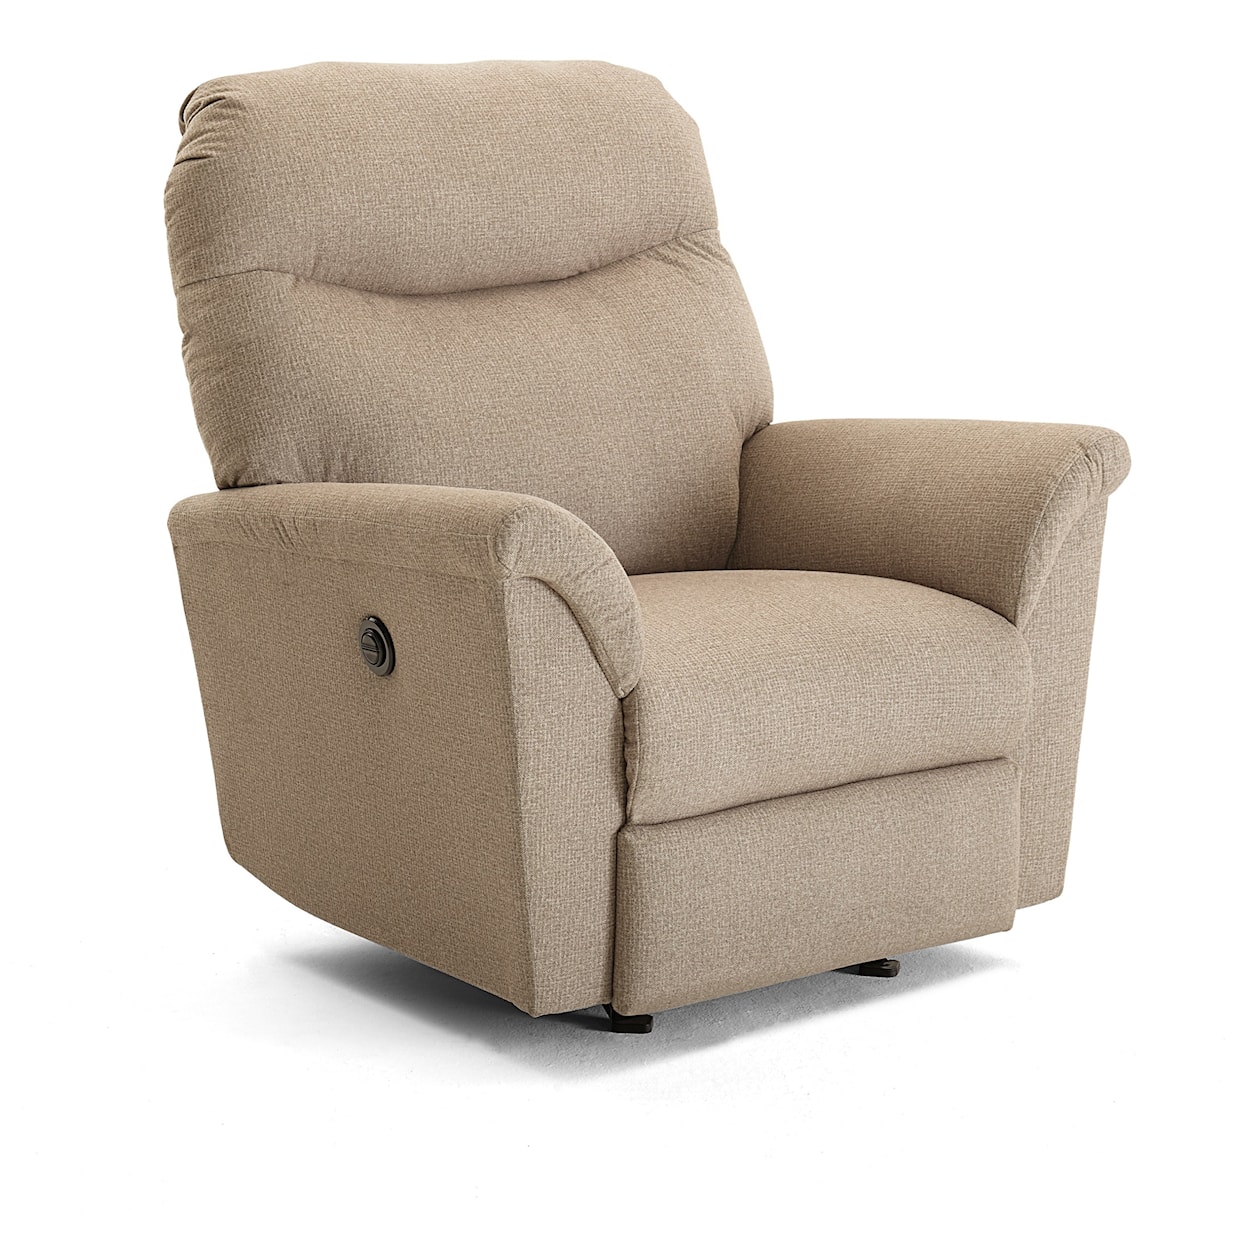 Best Home Furnishings Caitlin Space Saver Recliner